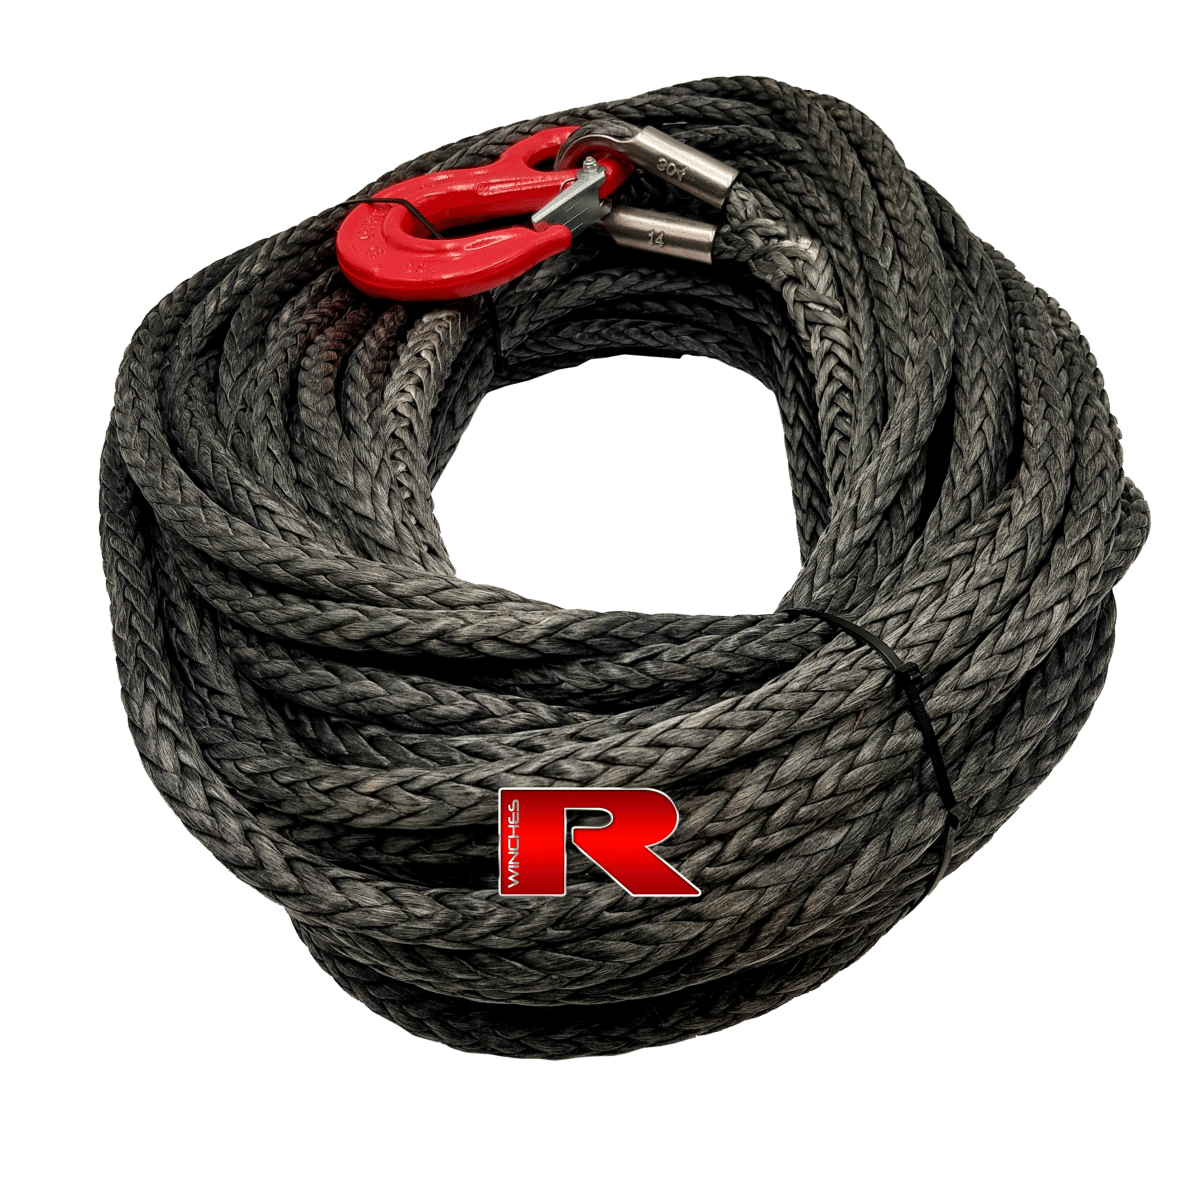 1/4′′ Synthetic Winch Rope – 9,000 lbs. Breaking Strength – Replacement Winch Rope for ATV & UTV and Winches Up to 5,000 lbs. (Winch Rope Color: Red